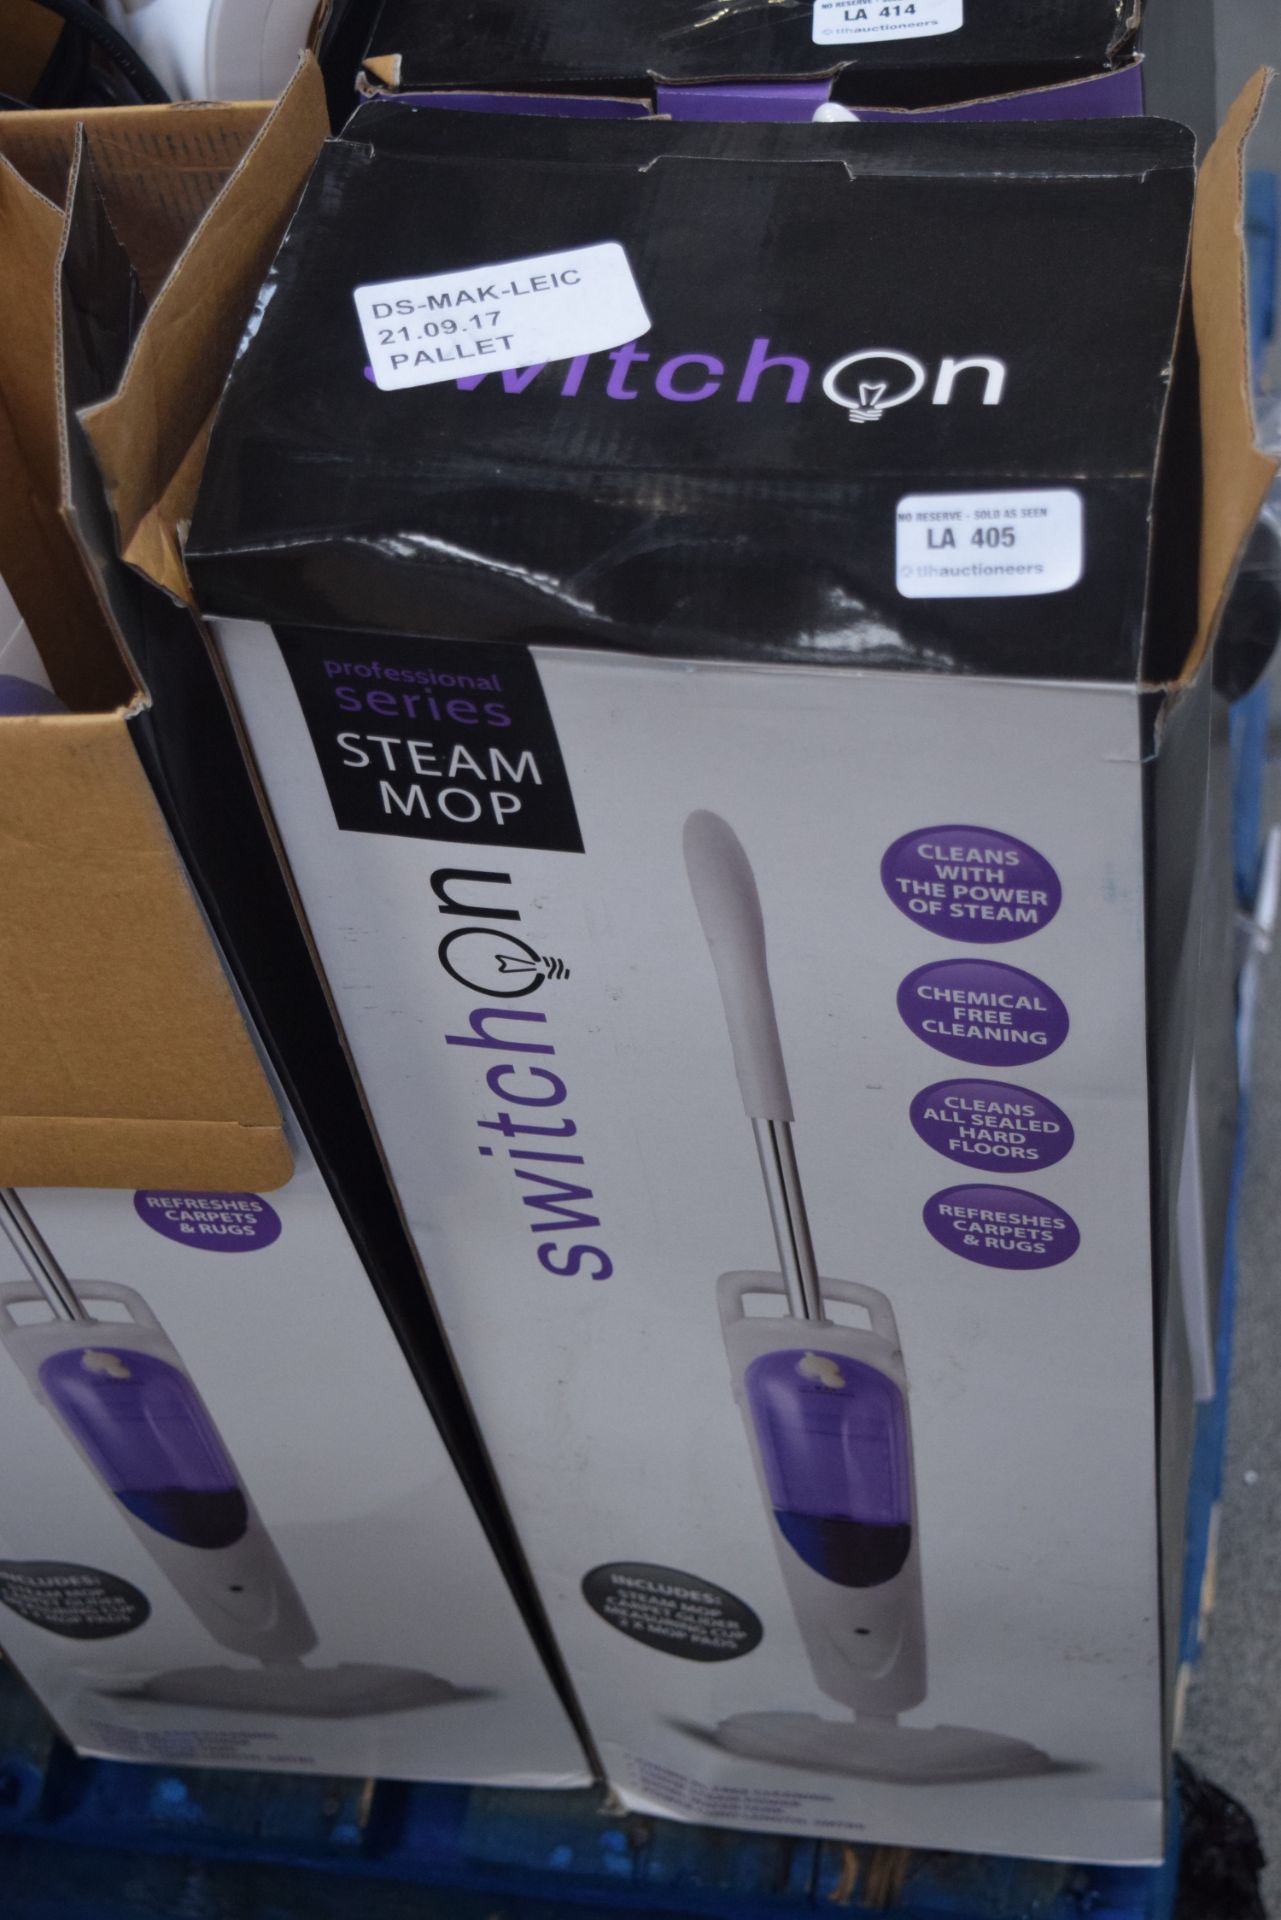 1 x BOXED SWITCH ON STEAM FLOOR CLEANER RRP £205 21.09.17 *PLEASE NOTE THAT THE BID PRICE IS